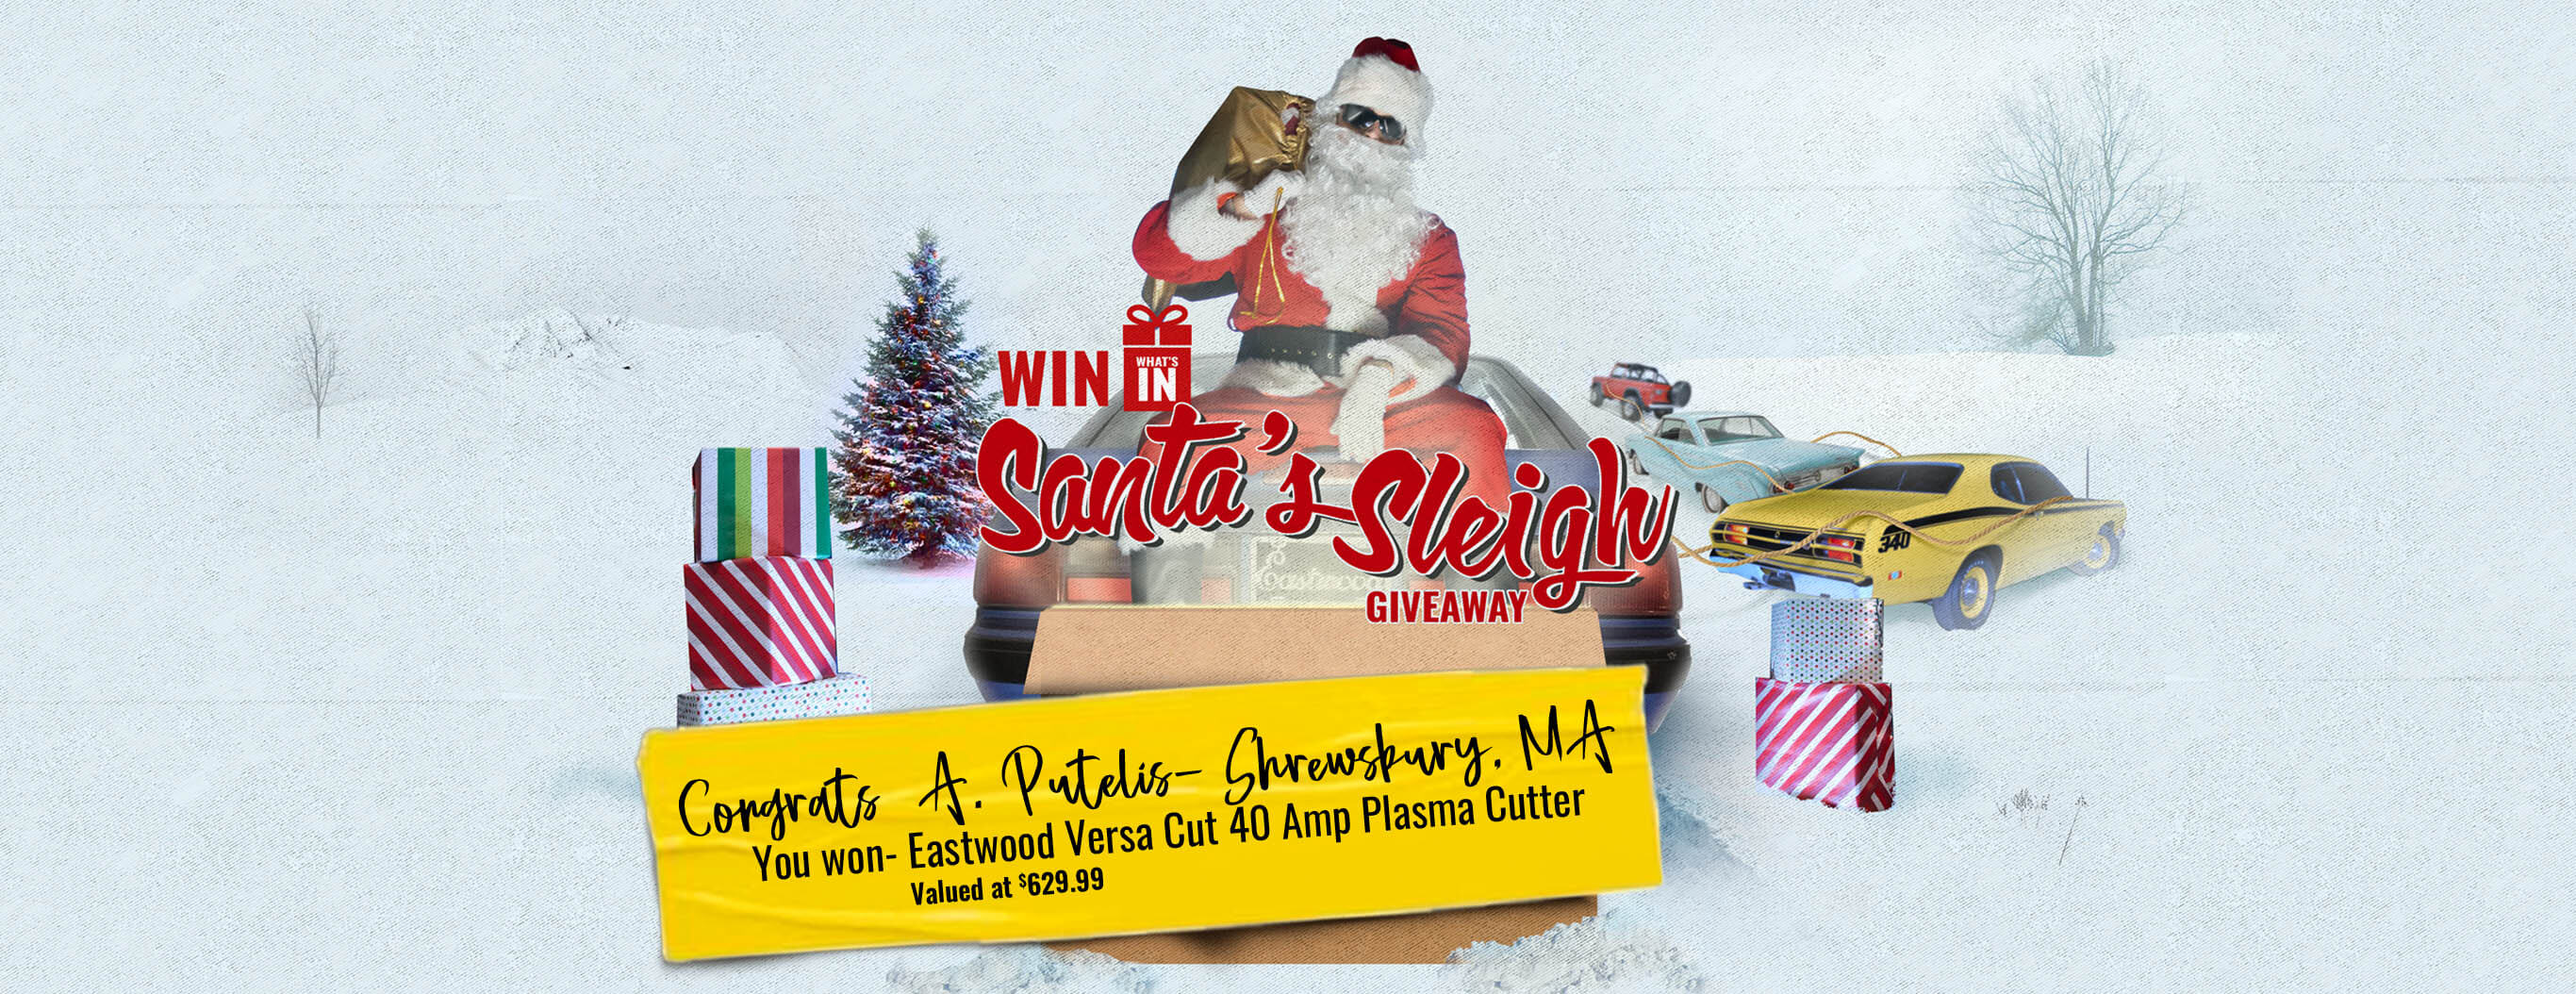 Win What's in Santa's Sleigh Giveaway